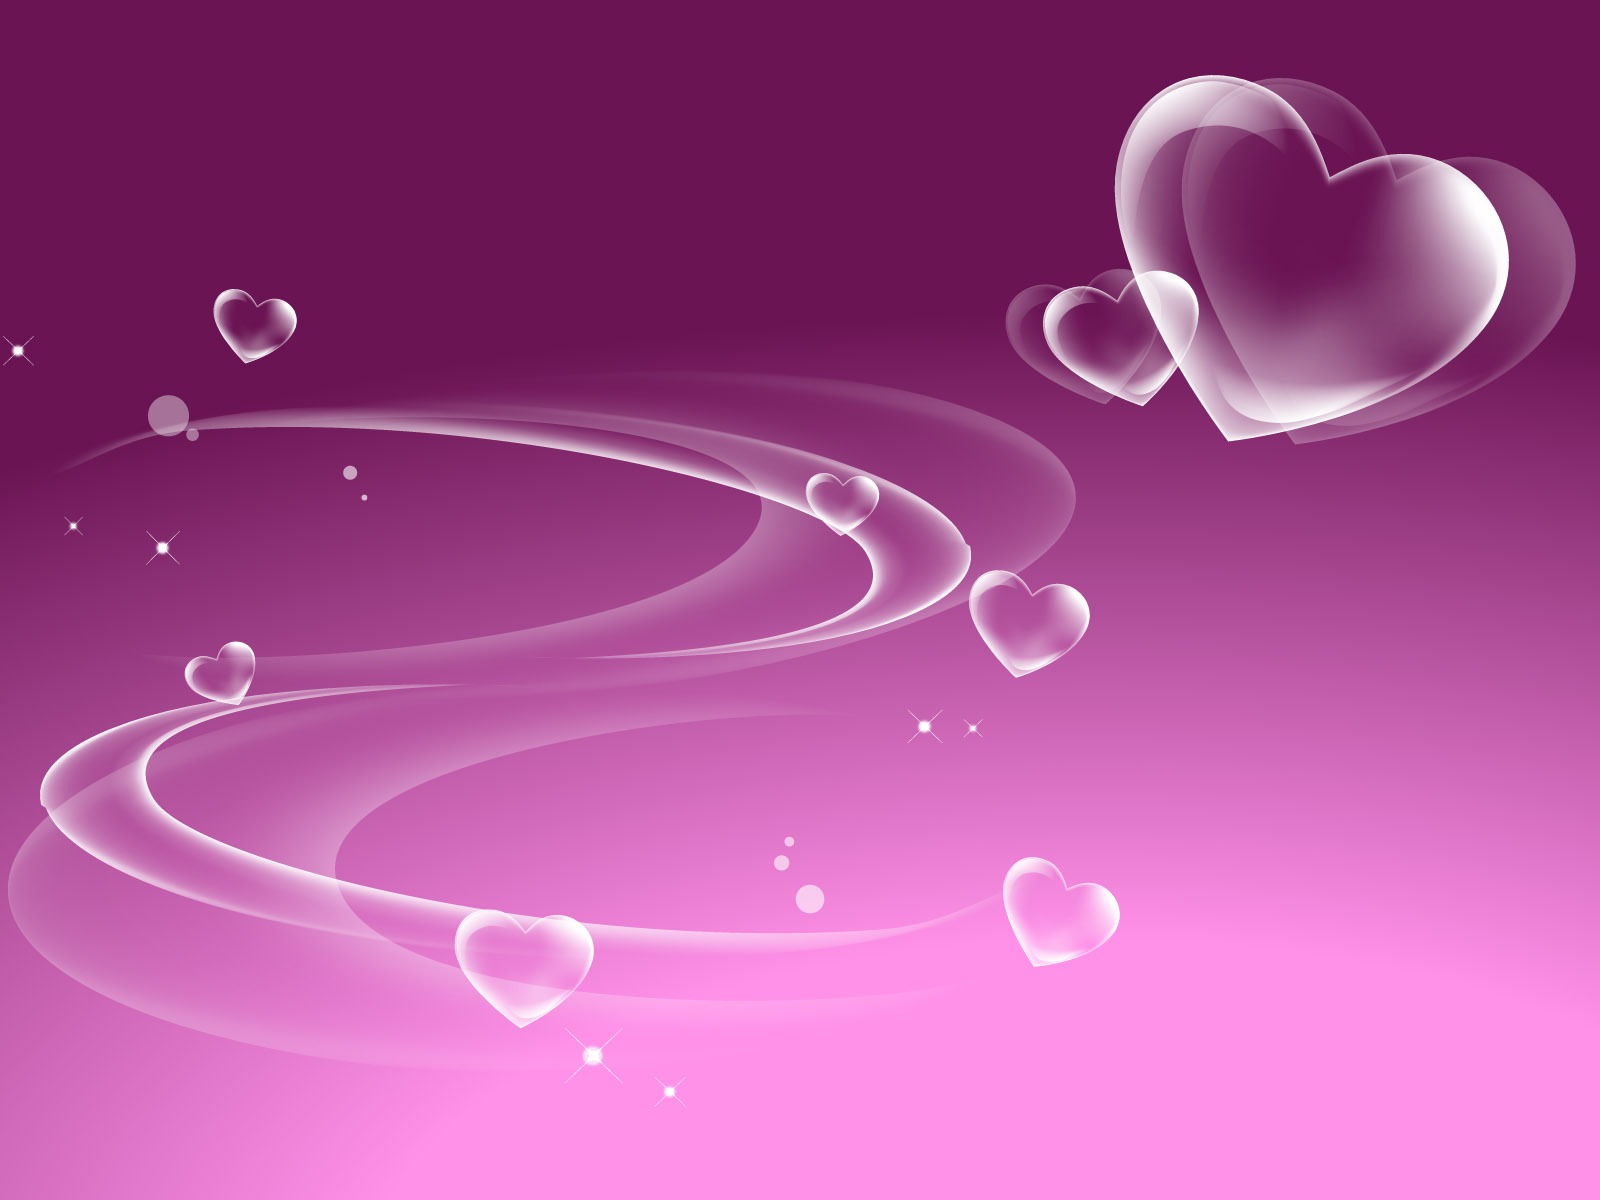 Valentine's Day Love Theme Wallpapers (2) #2 - 1600x1200